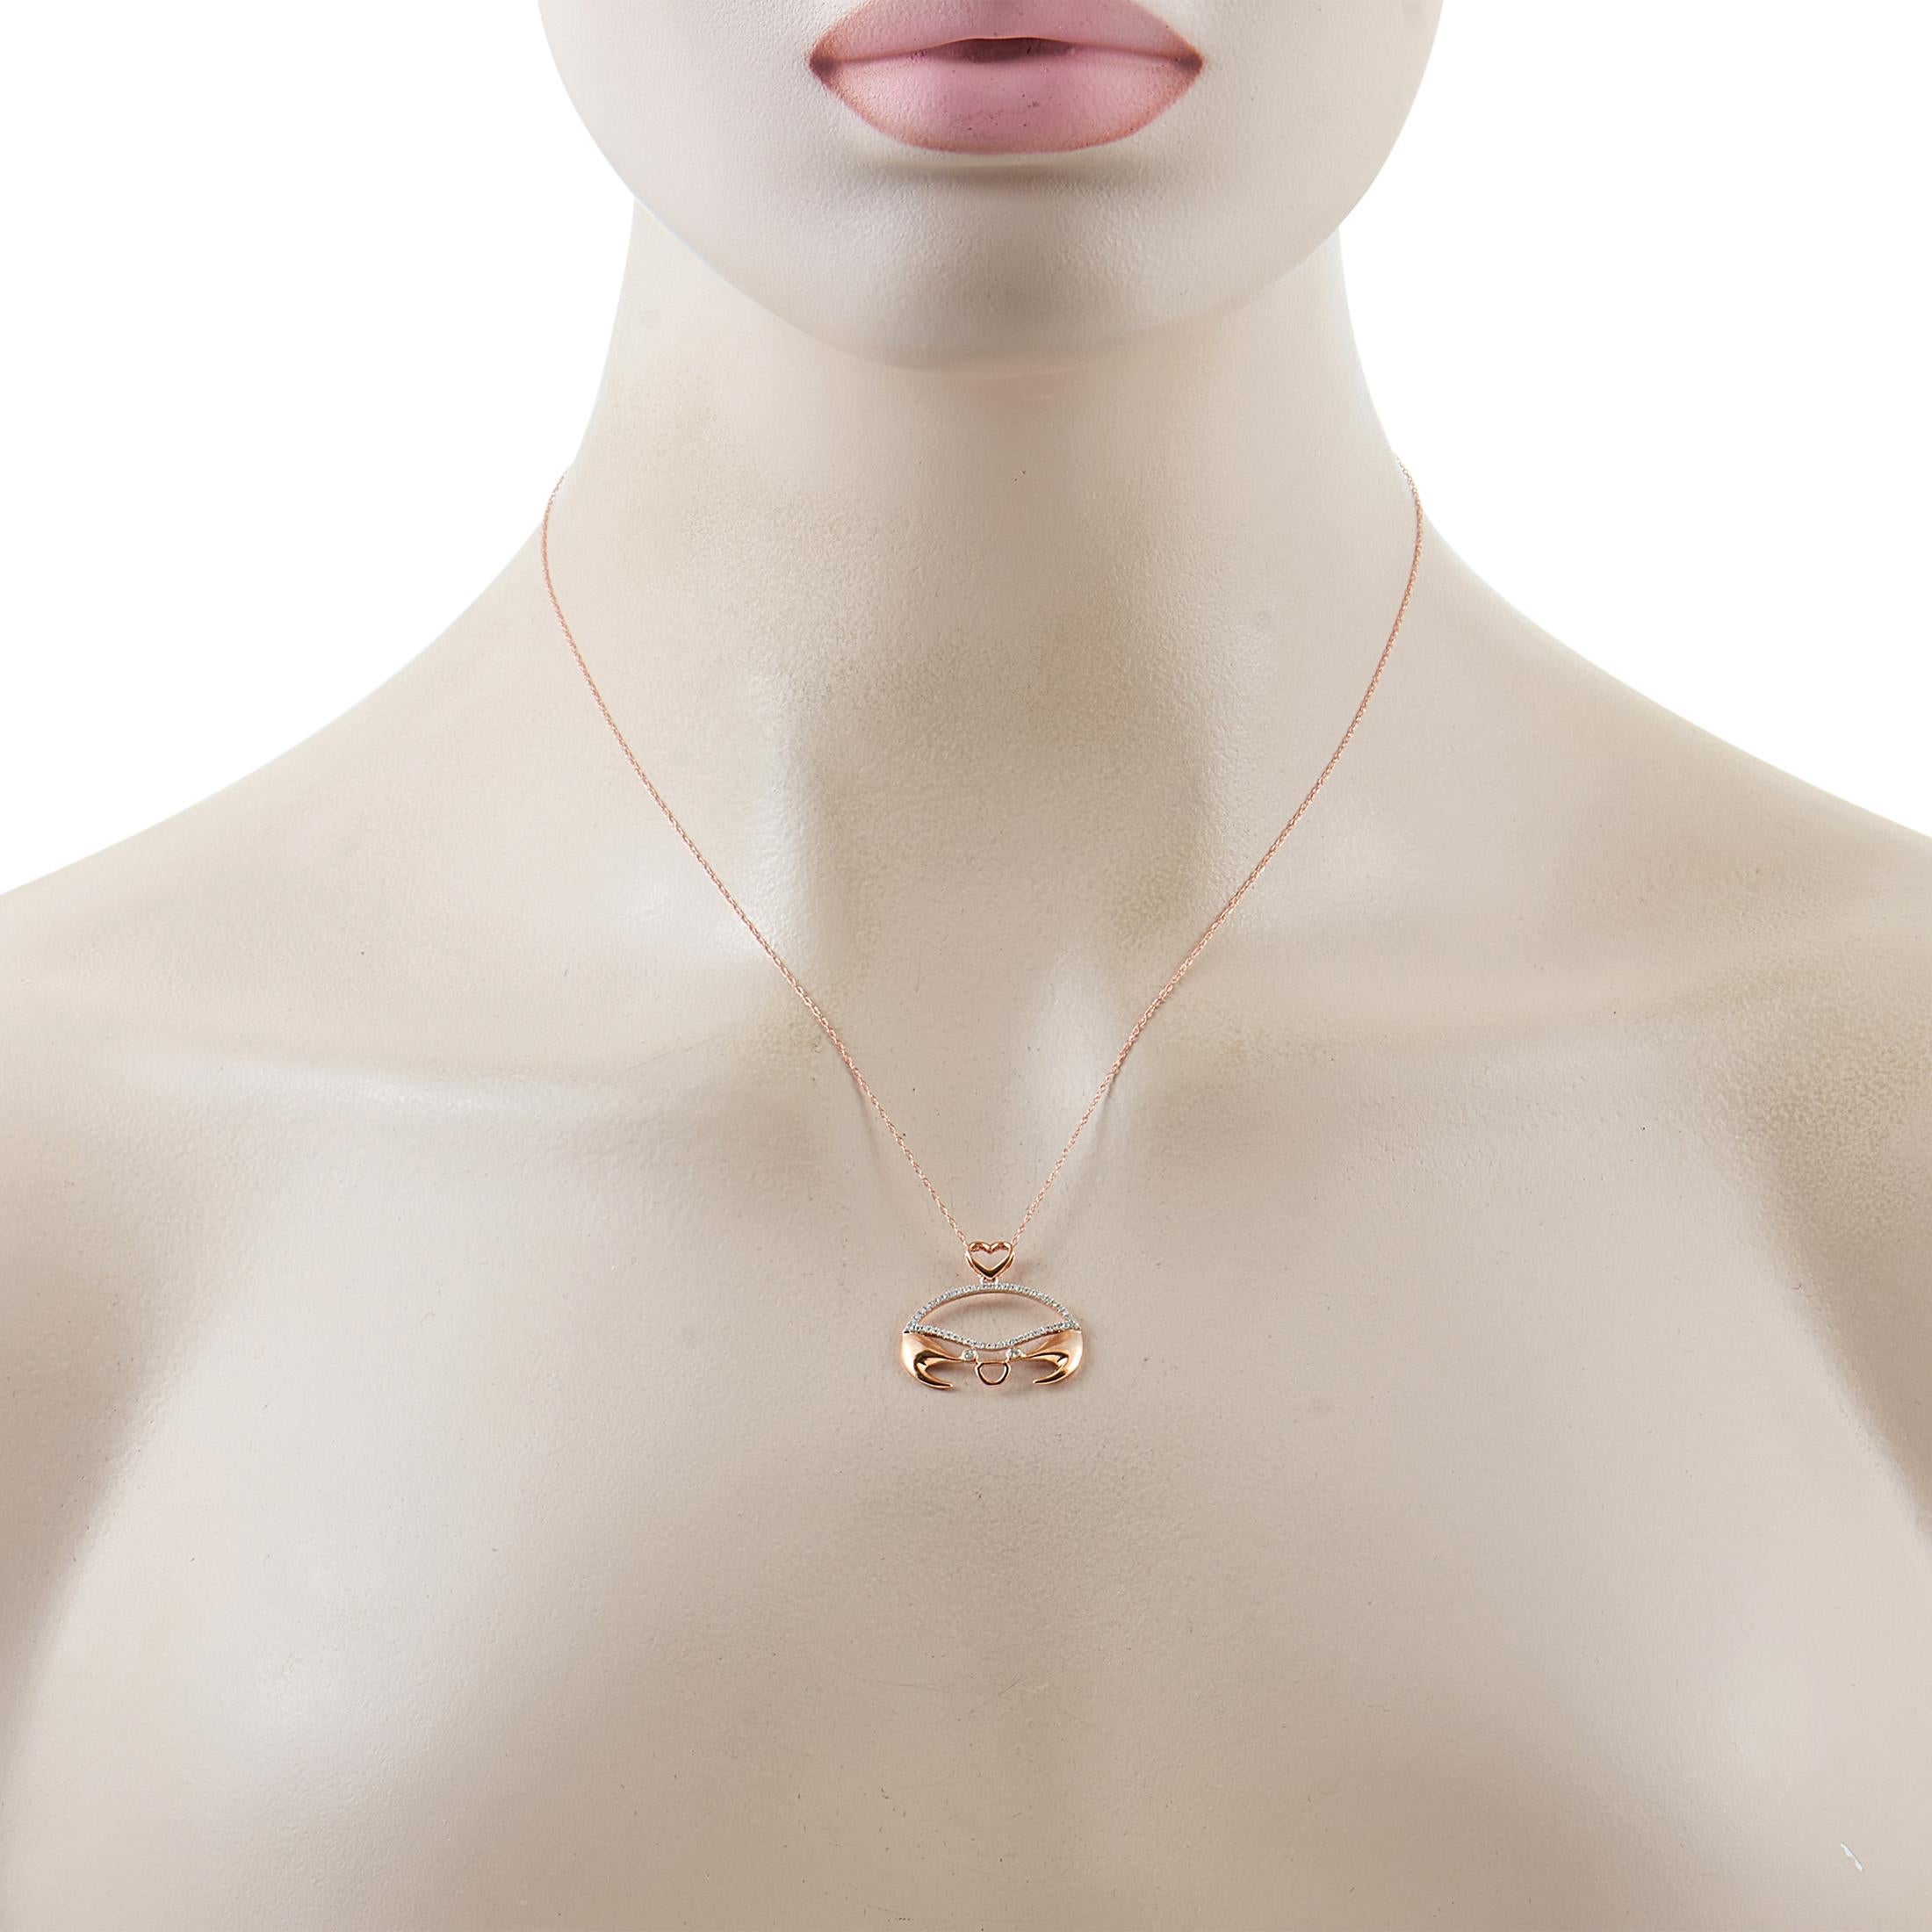 This LB Exclusive necklace is crafted from 14K rose gold and weighs 2.3 grams. It is presented with an 18” chain and boasts a crab pendant that measures 1” in length and 0.75” in width. The necklace is set with diamonds that total 0.16 carats.
 
